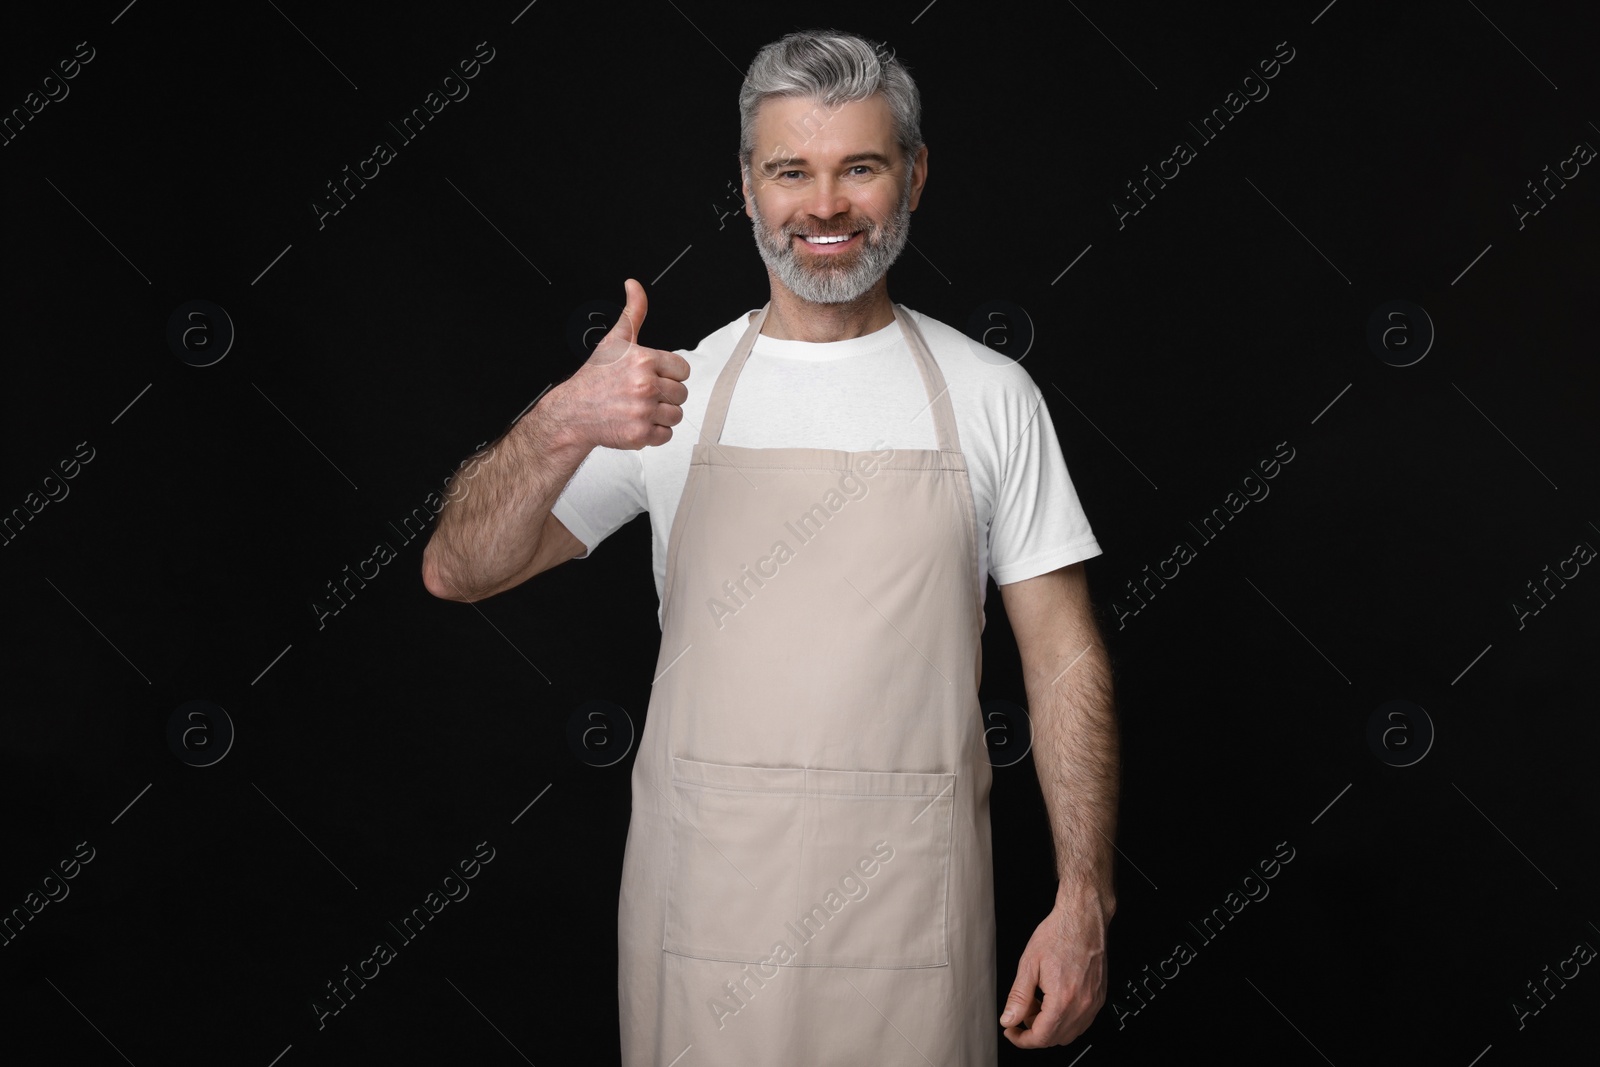 Photo of Happy man in kitchen apron showing thumbs up on black background. Mockup for design